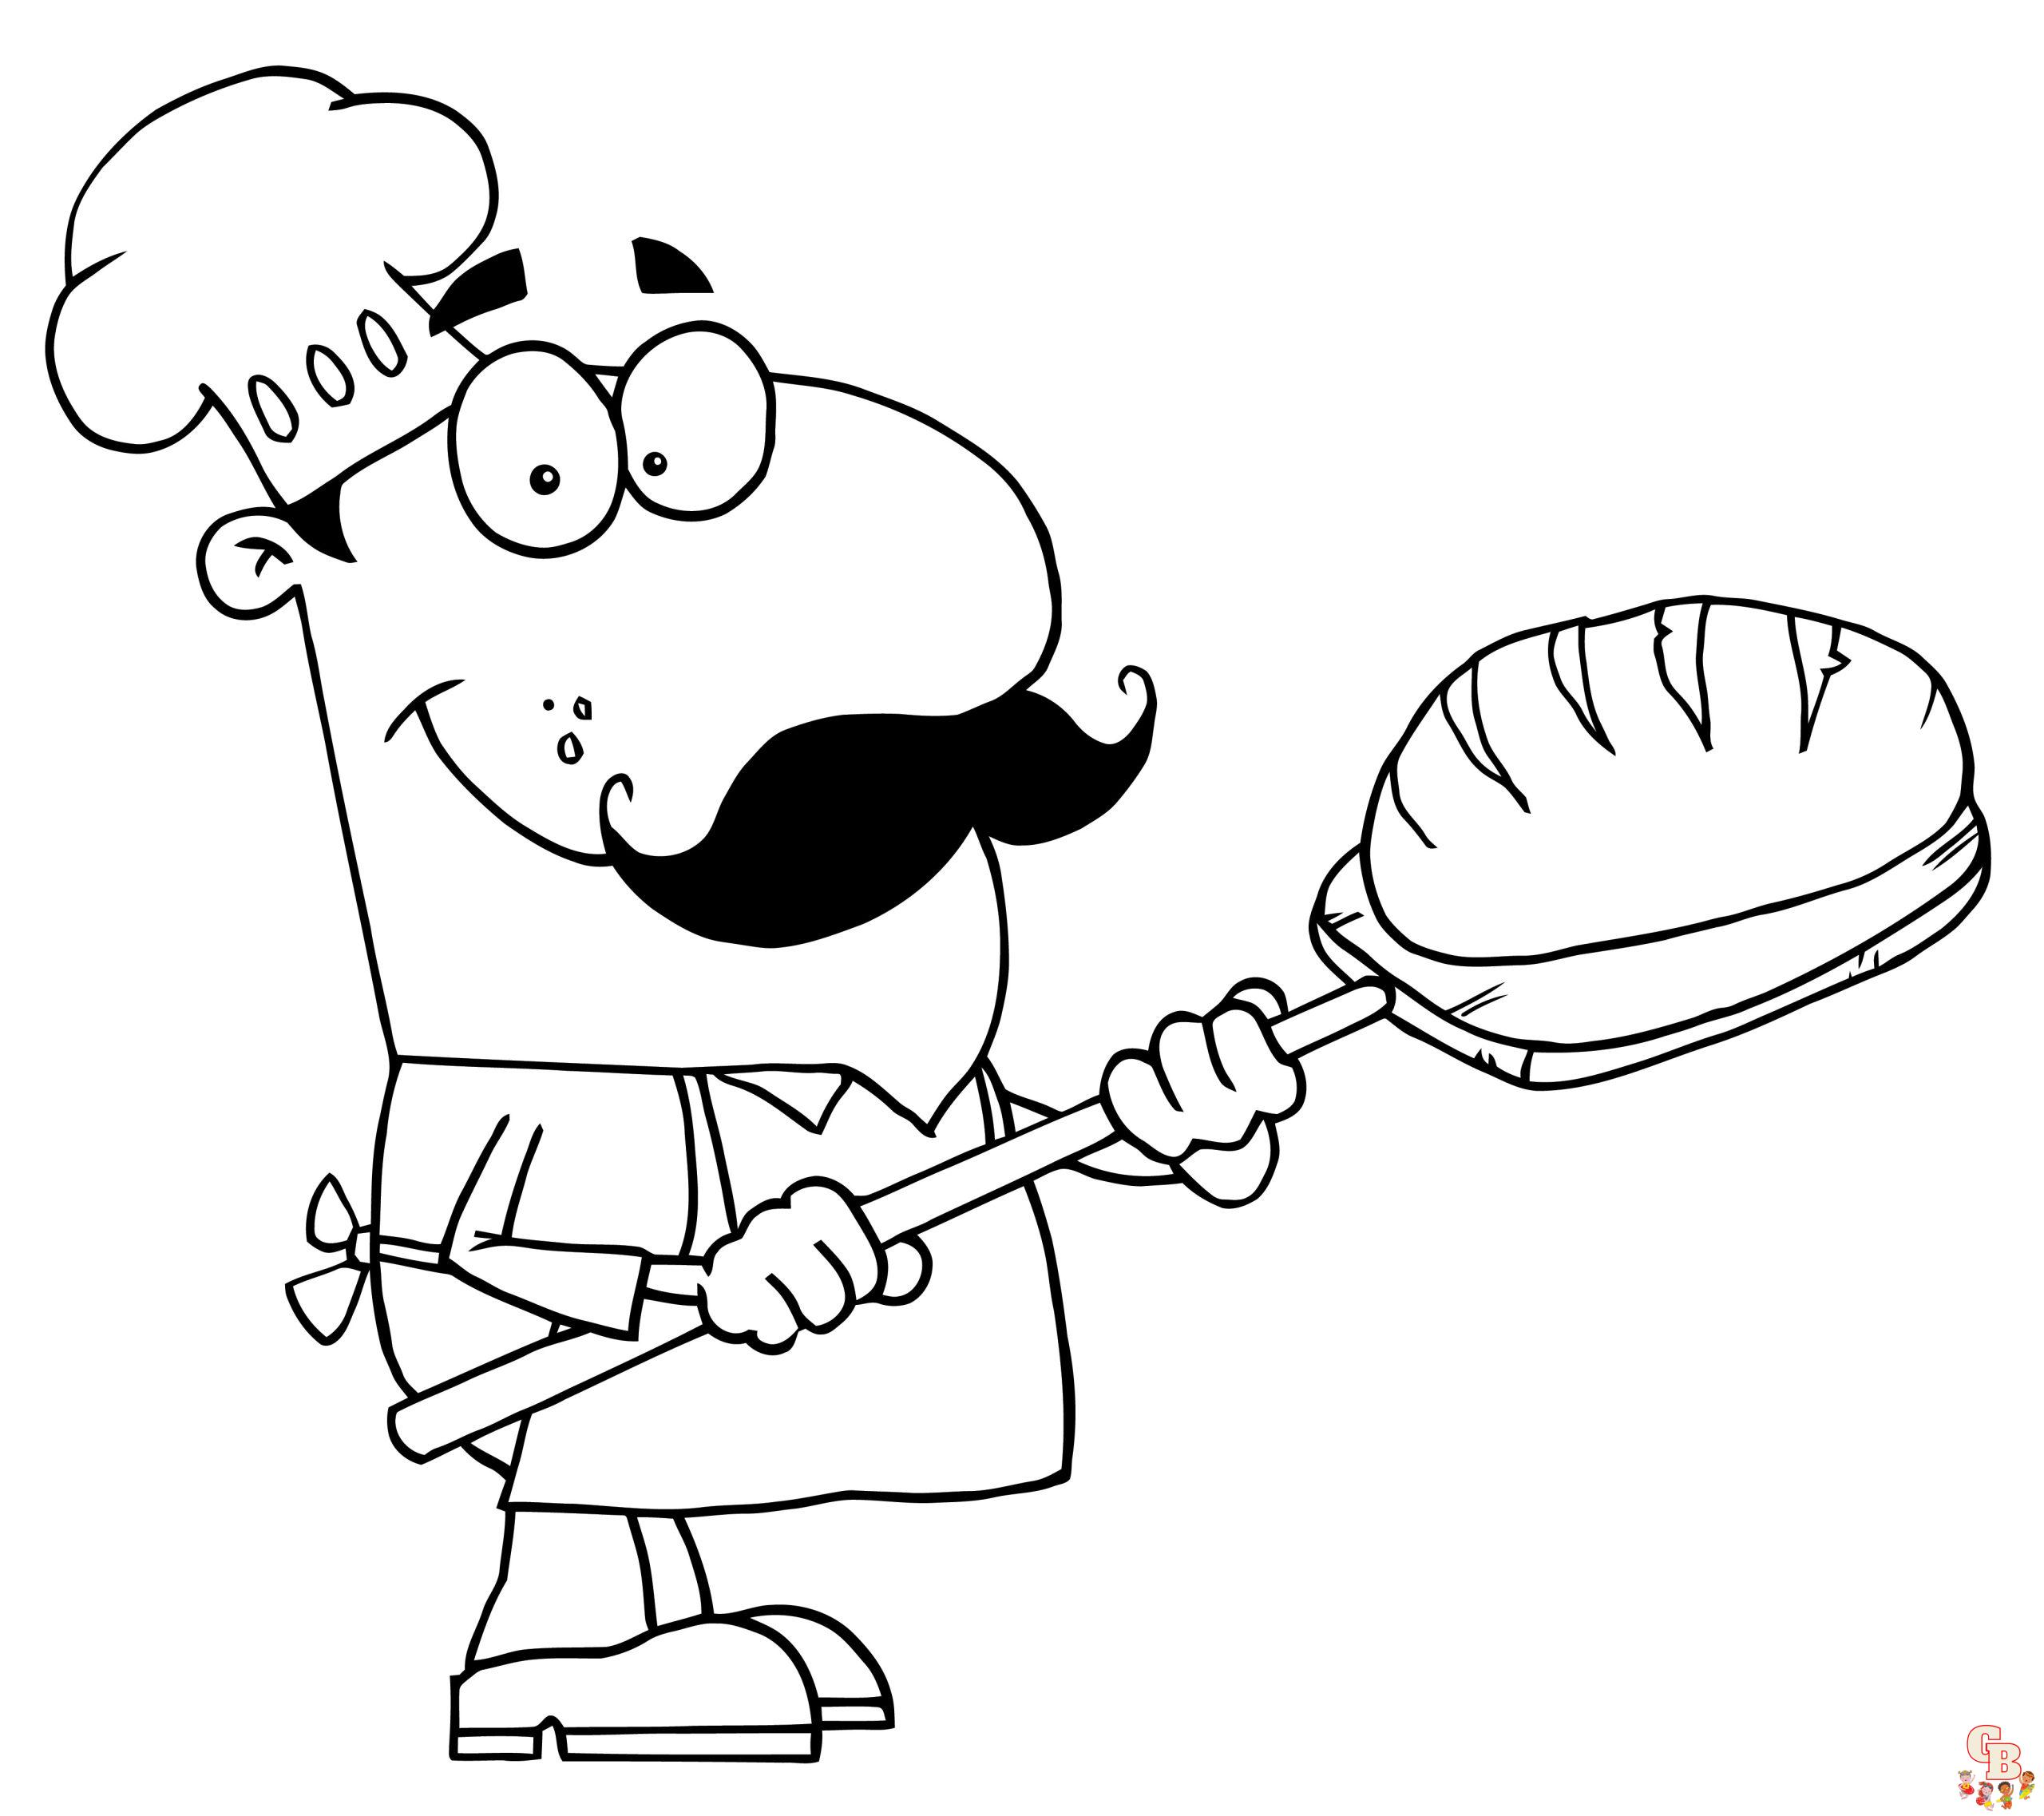 Coloring pages about professions